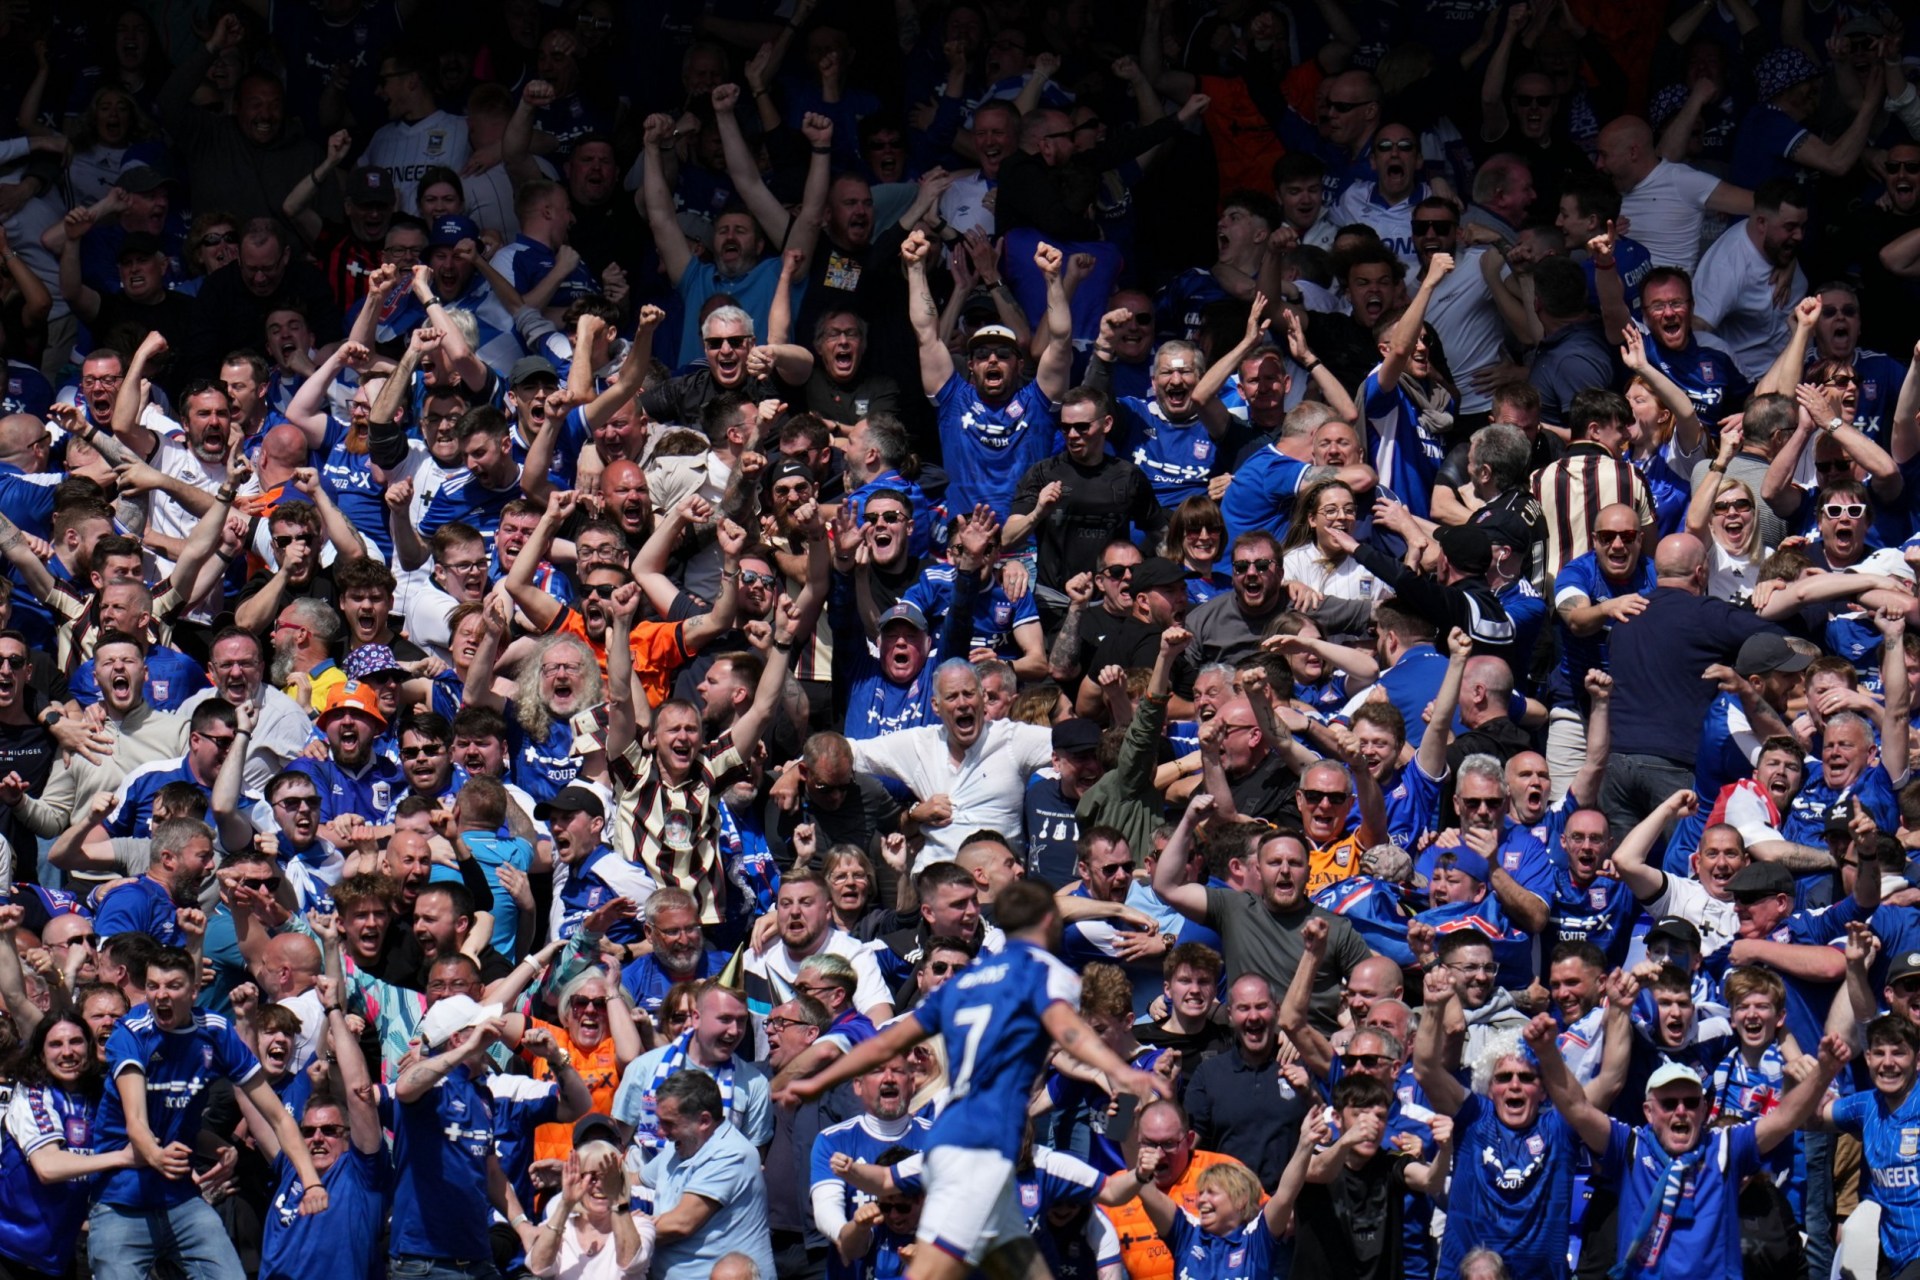 ipswich town clinch premier league promotion after agonising 22-year wait